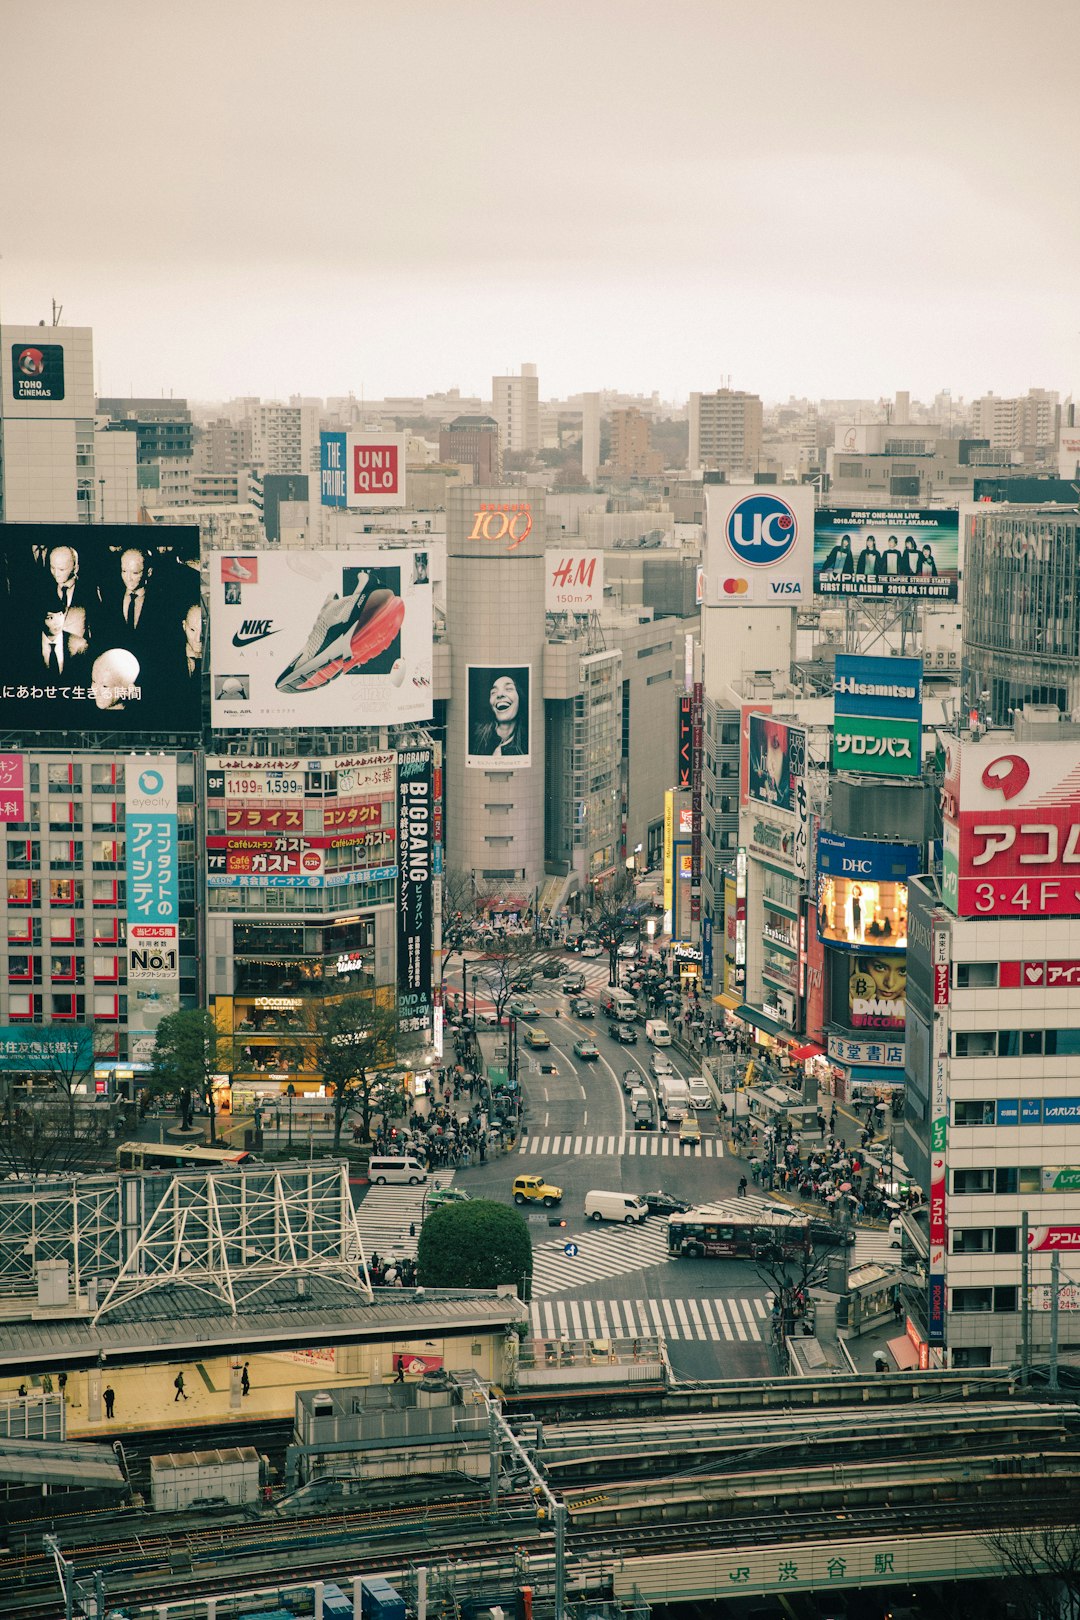 Travel Tips and Stories of Shibuya Crossing in Japan